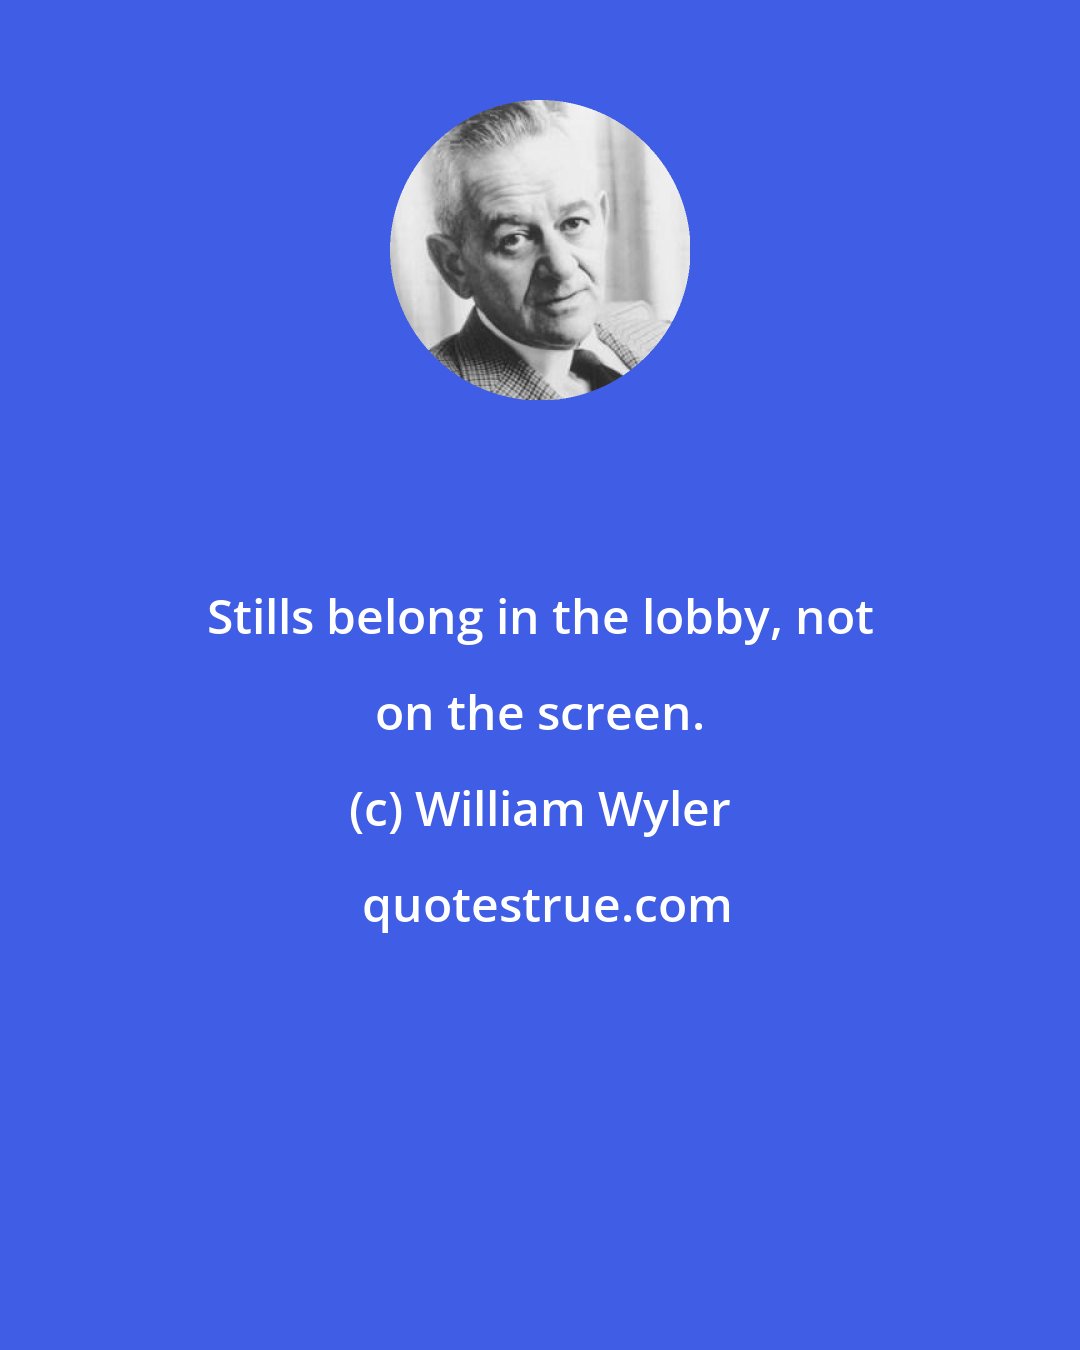 William Wyler: Stills belong in the lobby, not on the screen.